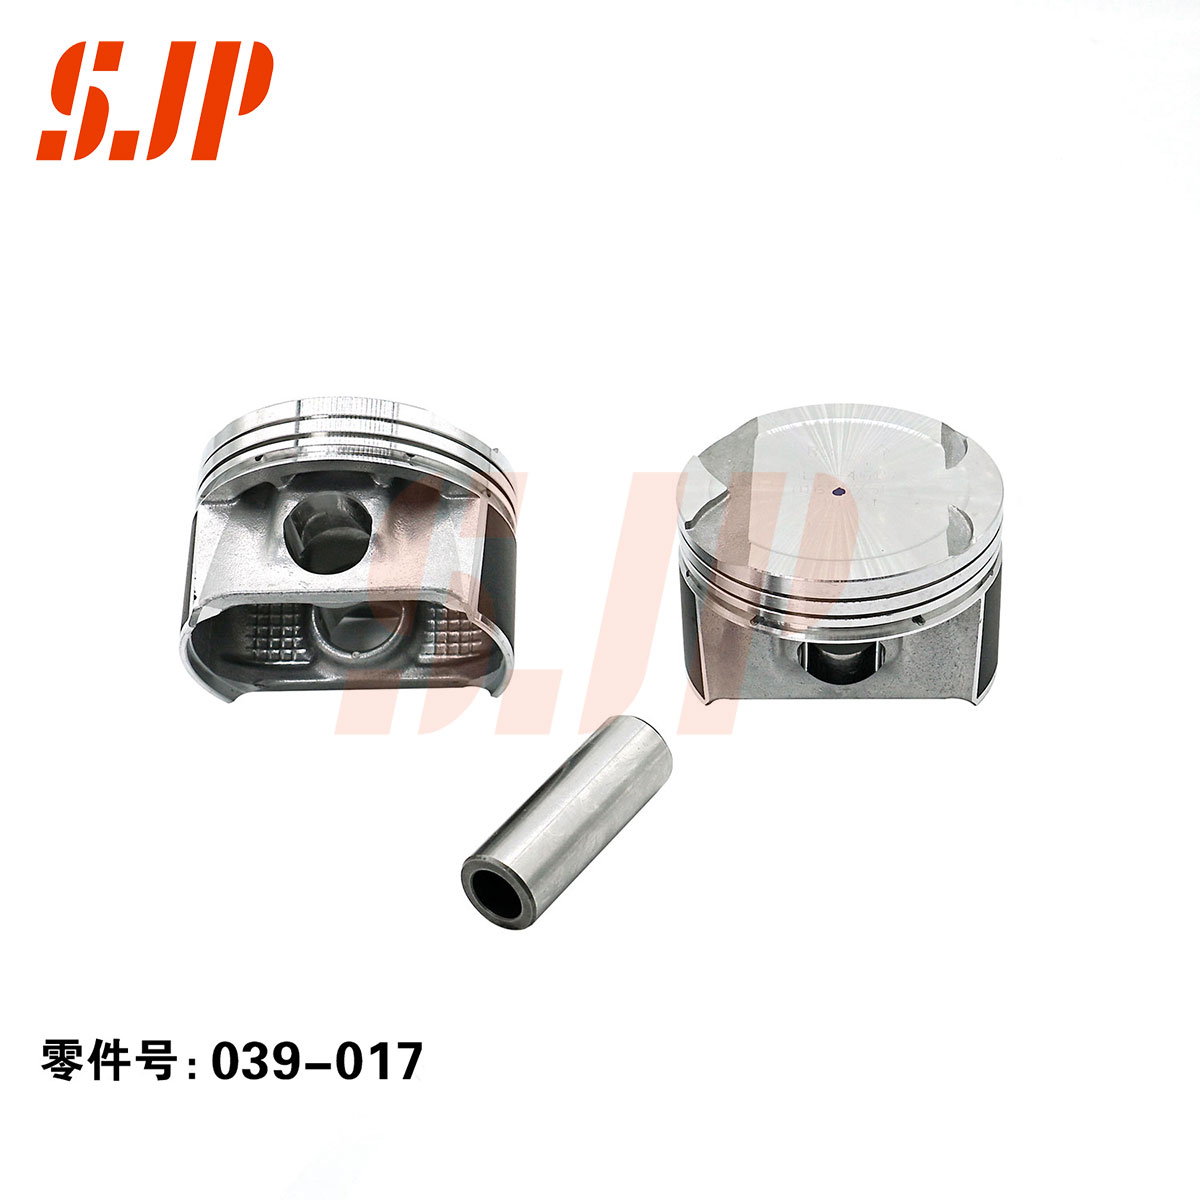 SJ-039-017 Piston And Pin For Geely 4G15DVVT